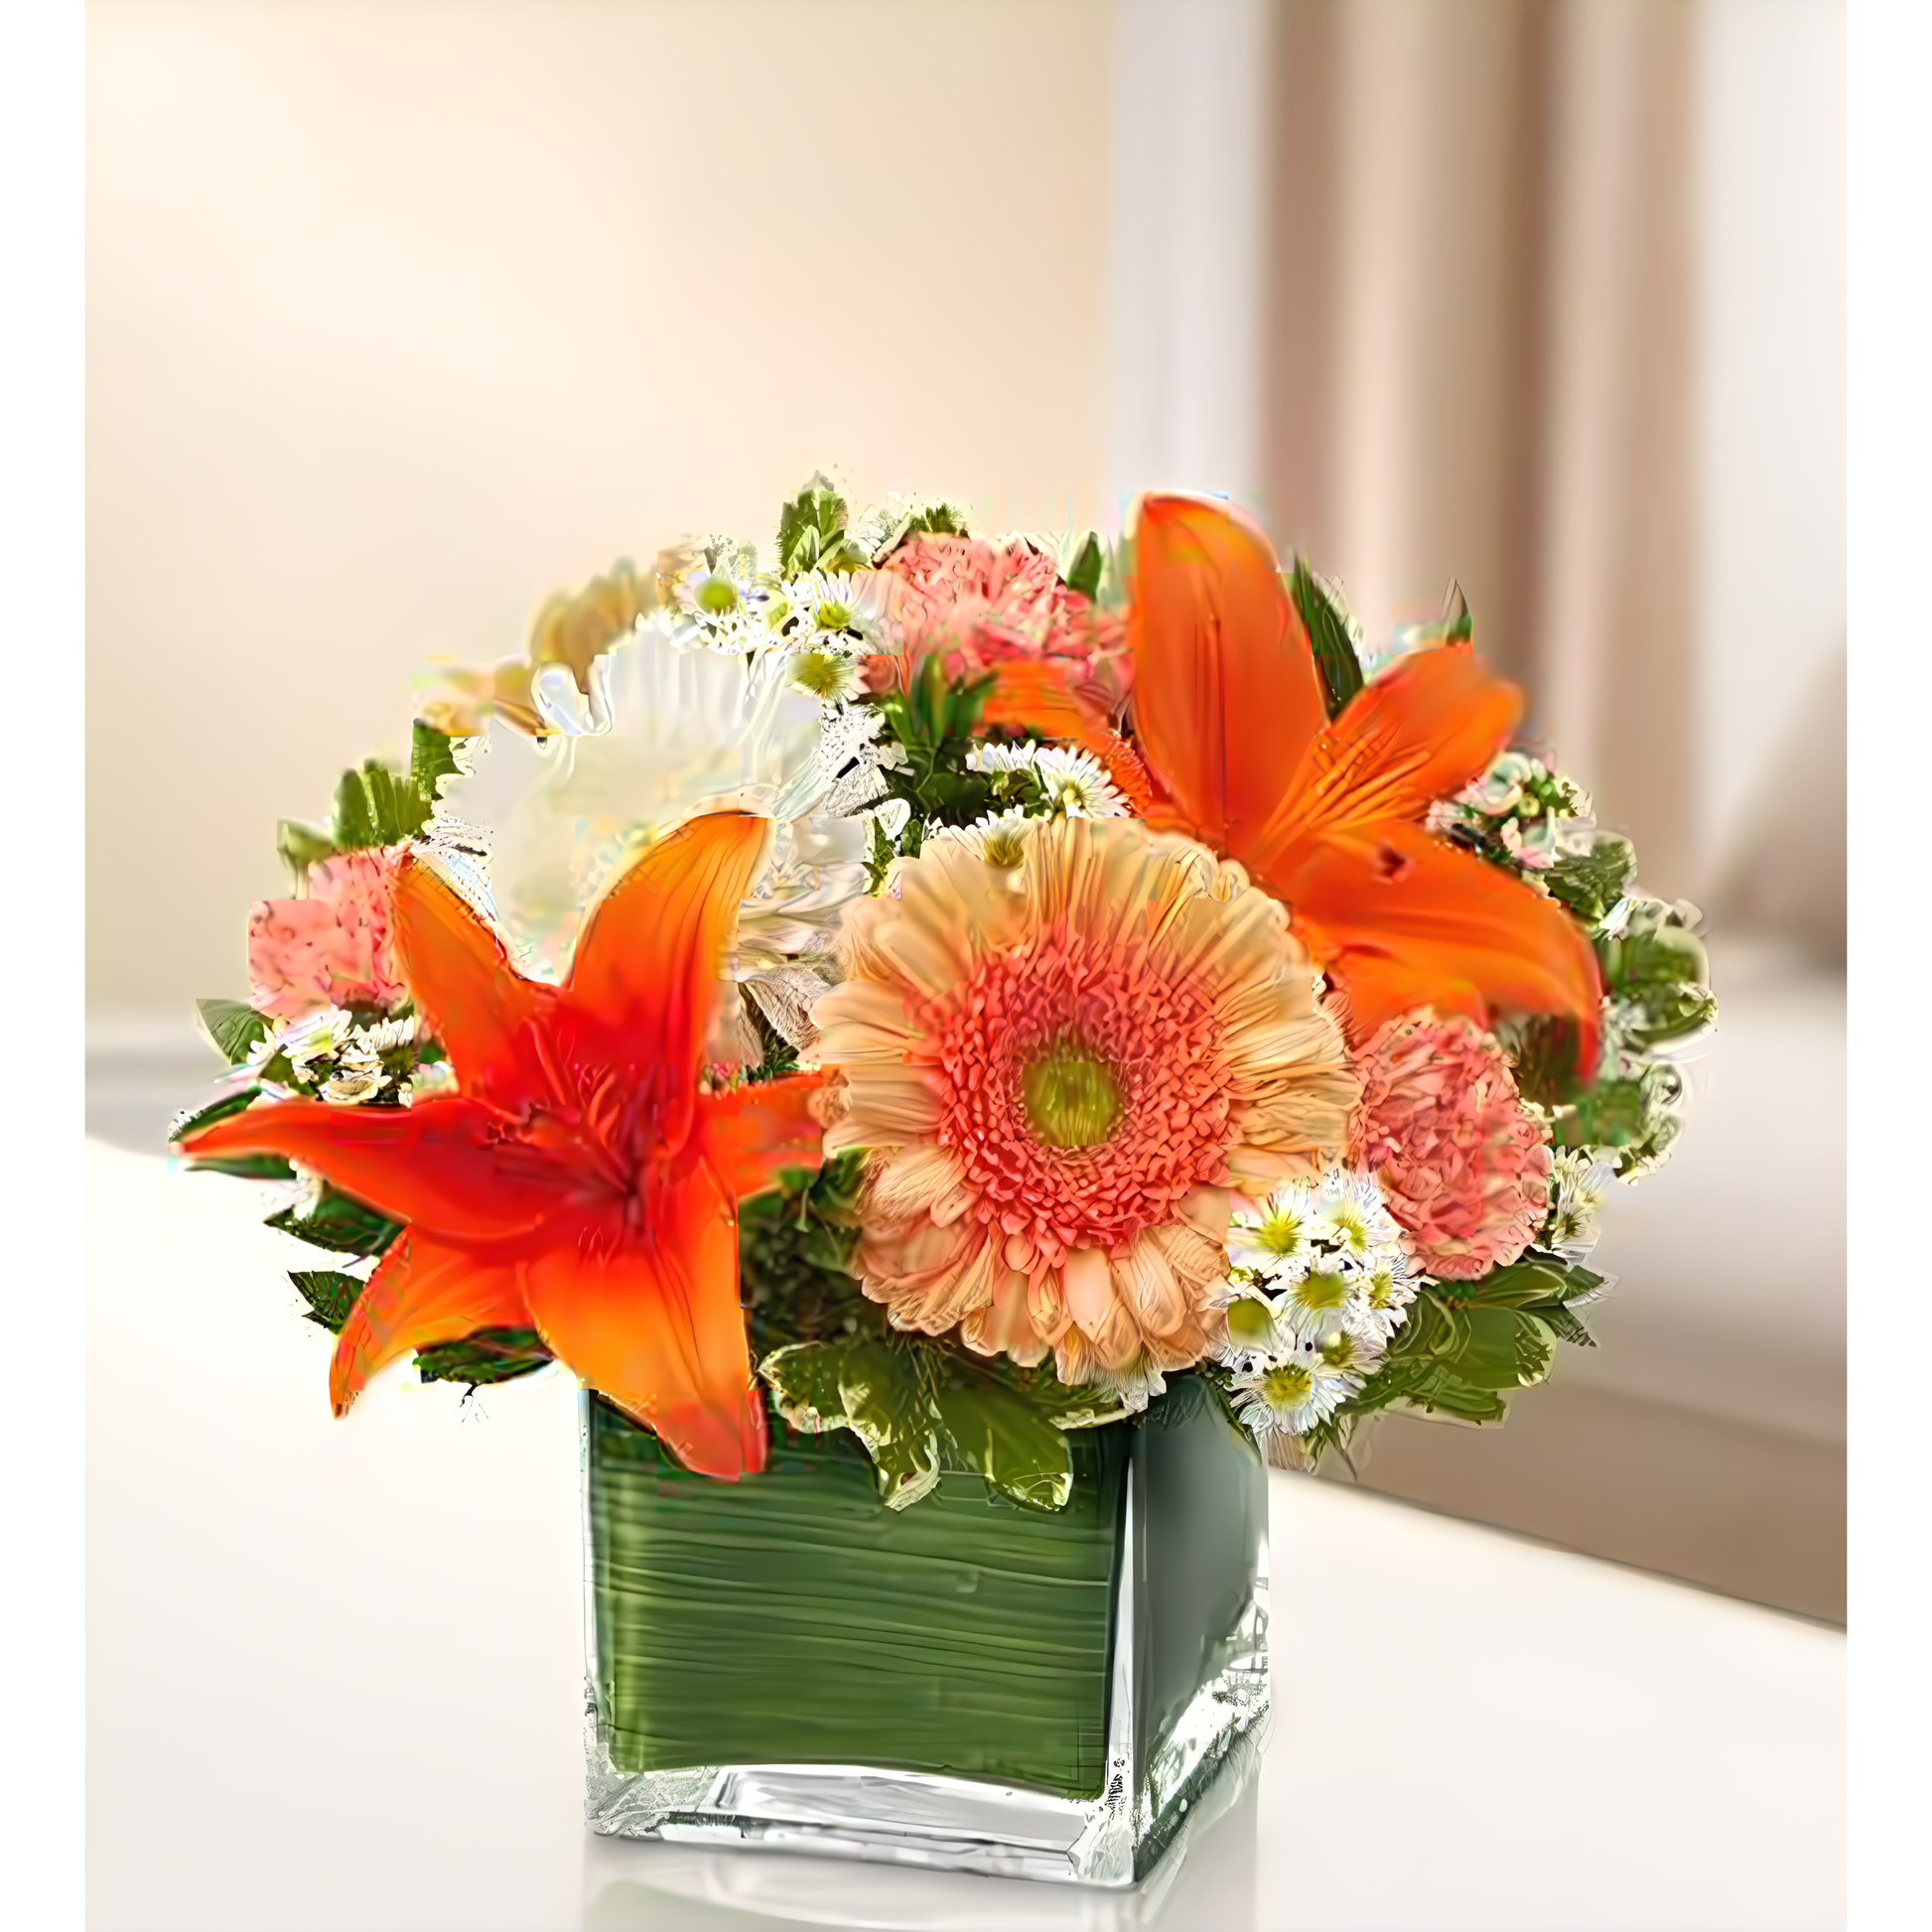 NYC Flower Delivery - Healing Tears - Peach, Orange and White - Funeral > Vase Arrangements